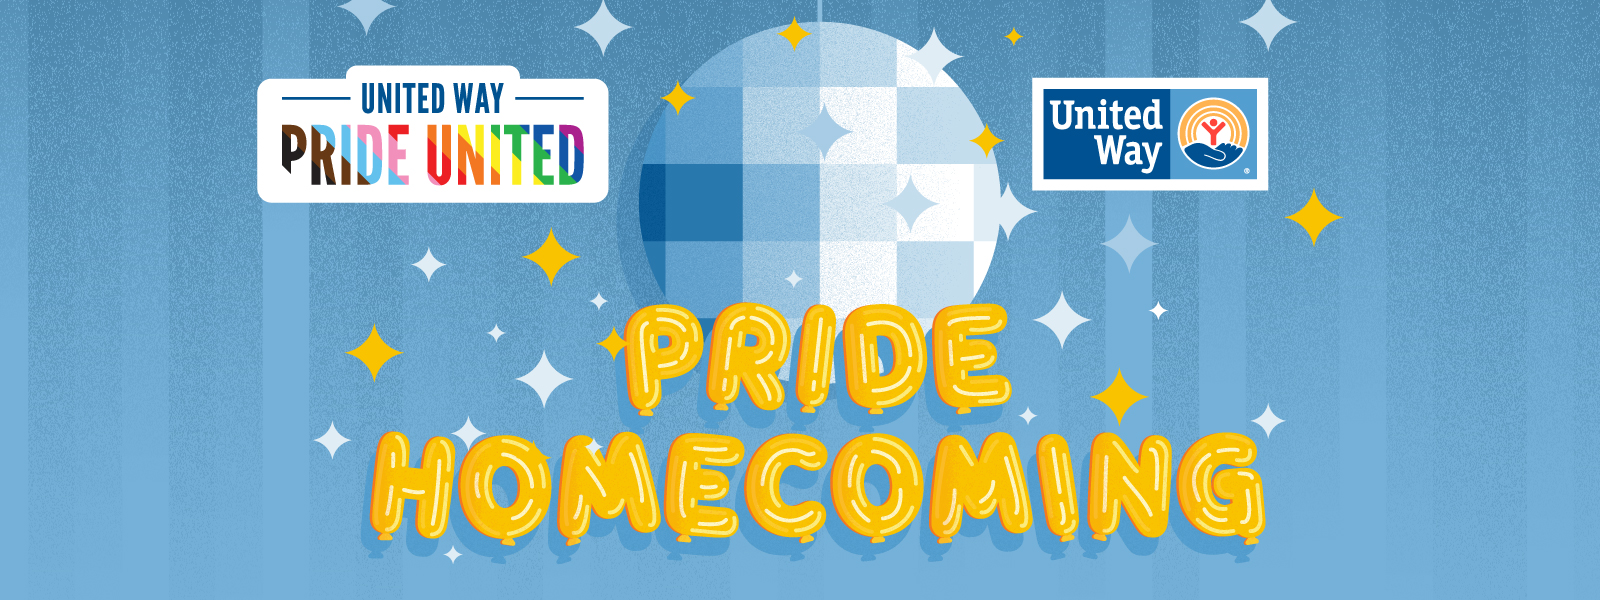 Image of disco ball and with gold balloons saying "Pride Homecoming"